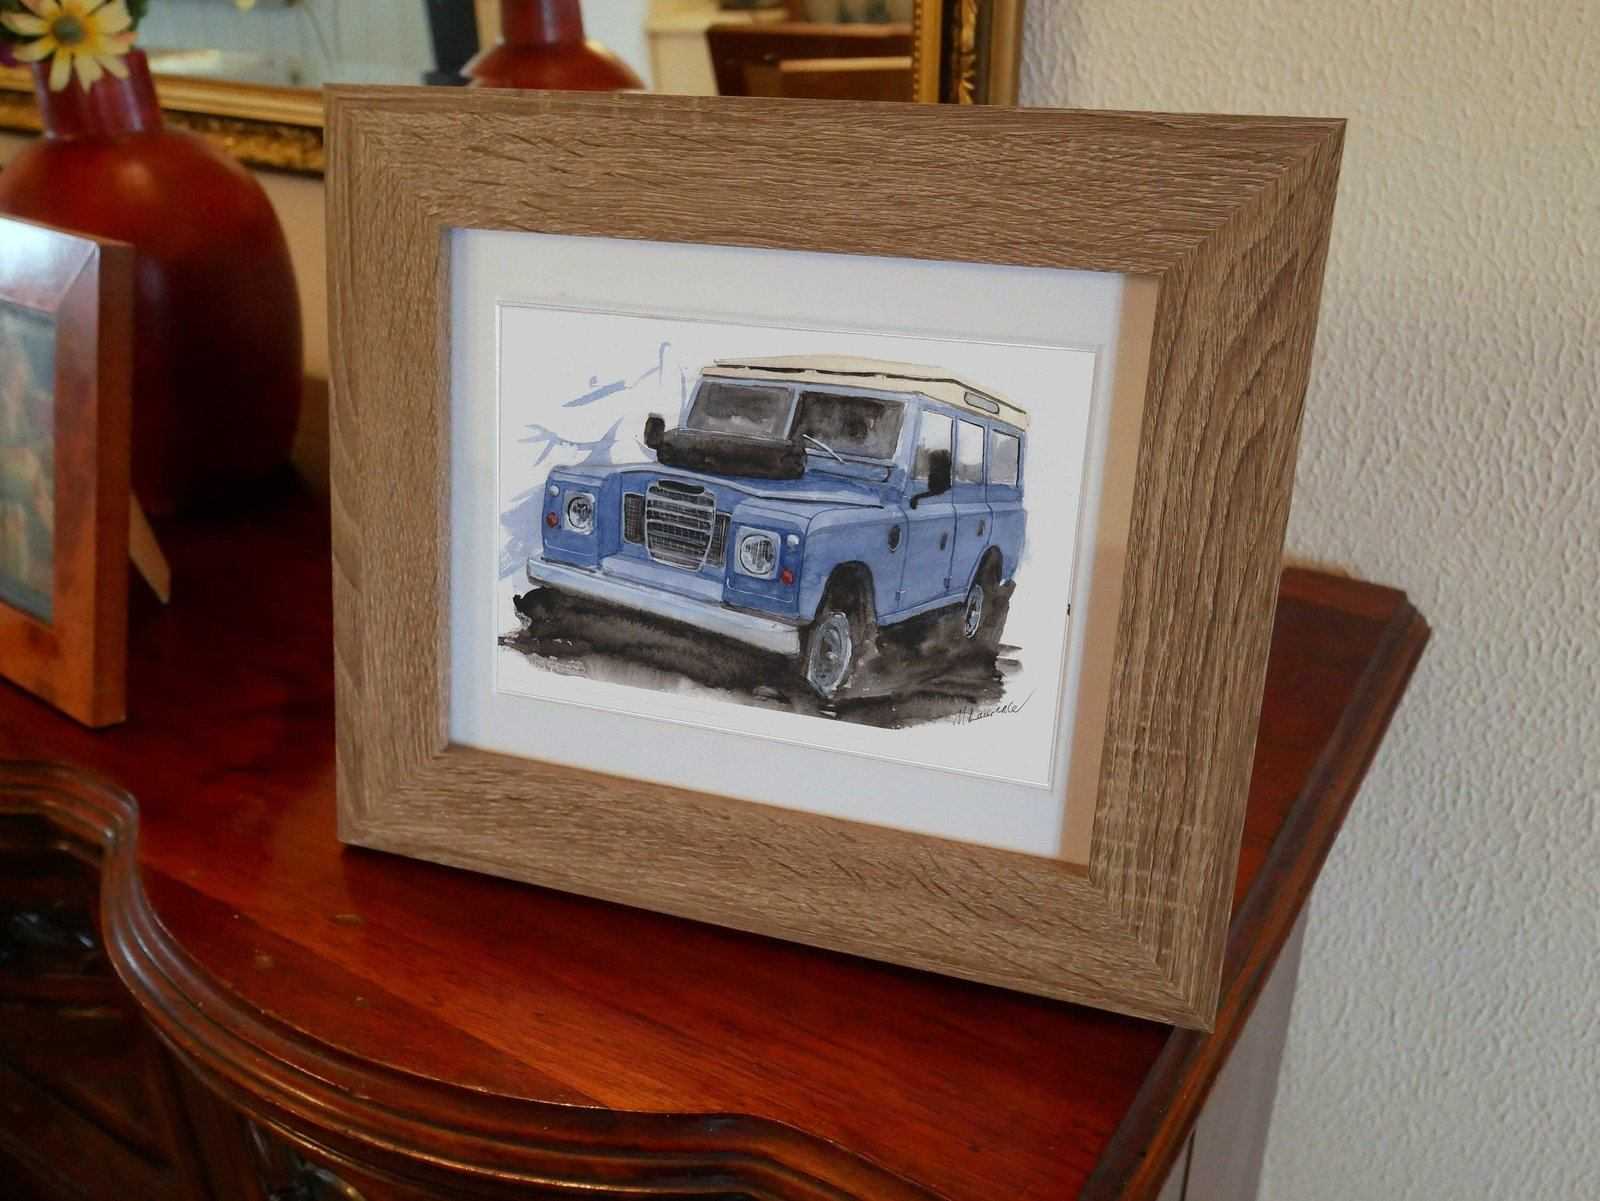 Landrover Series 3 Print Watercolour Painting Limited Print ArtbyMyleslaurence